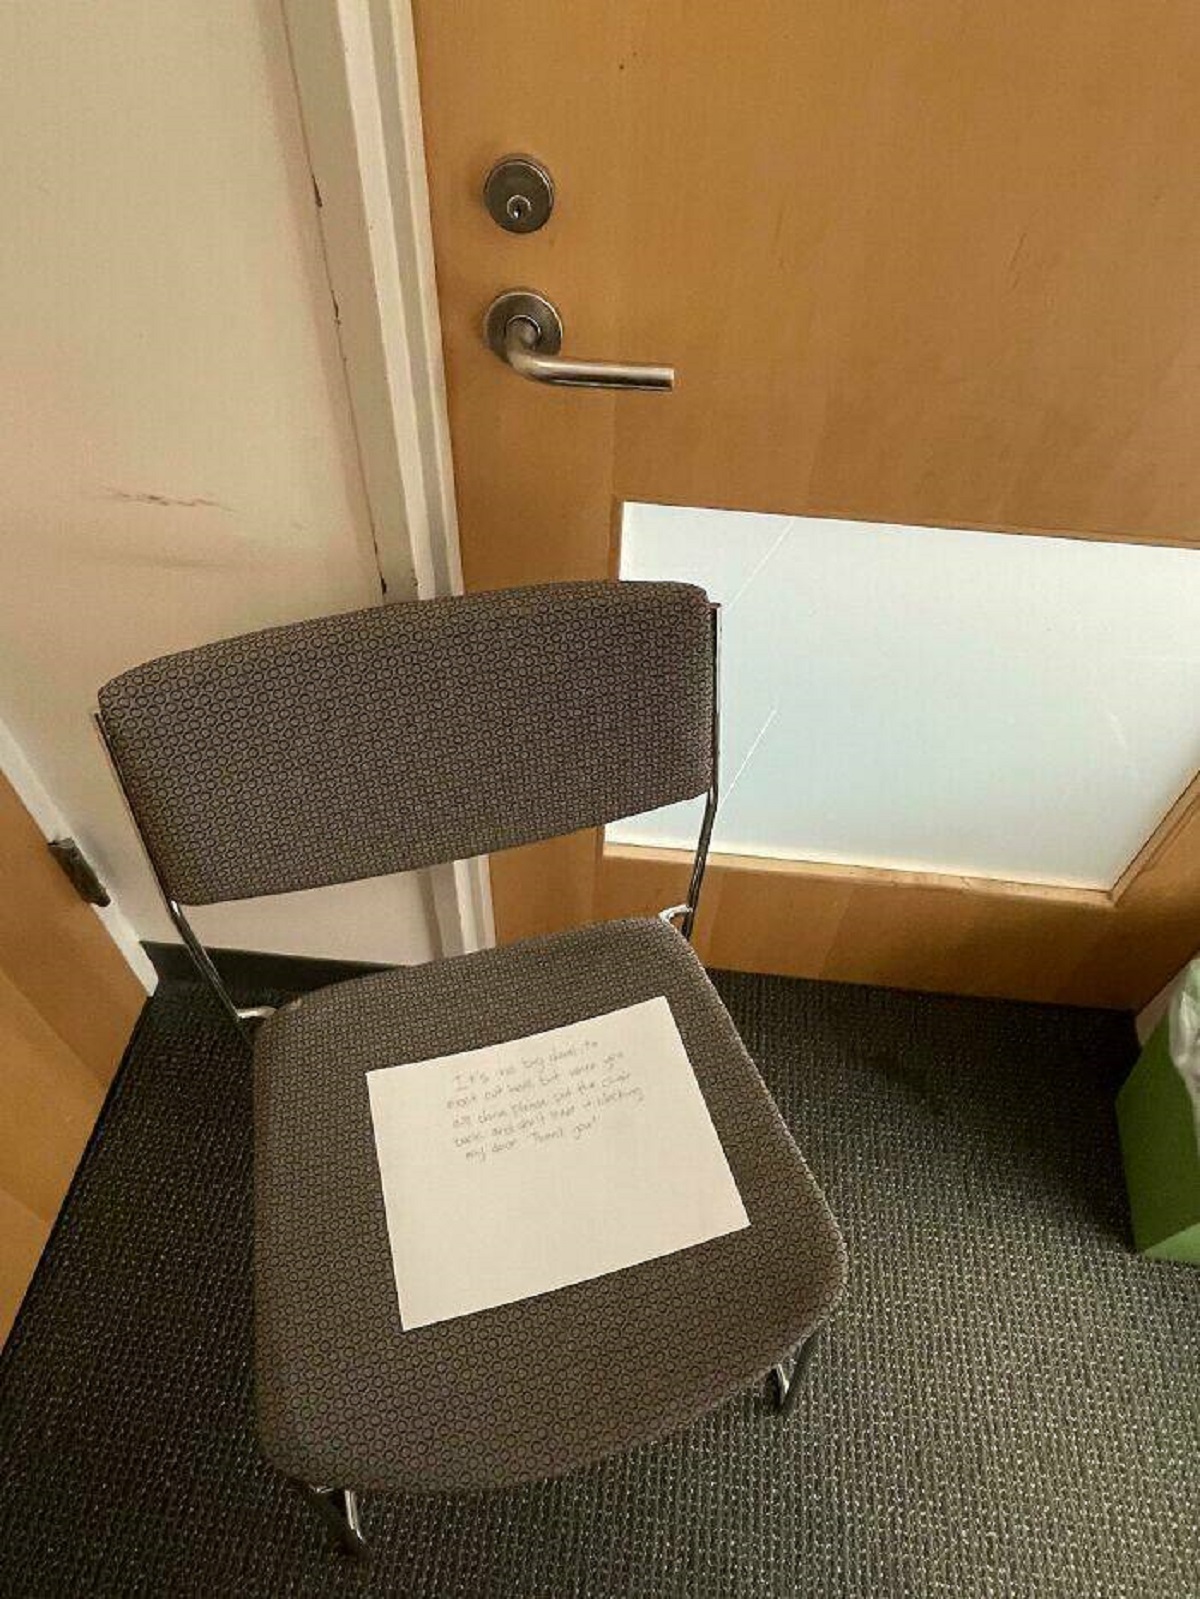 "People Meet Outside My Office And Leave Chairs Blocking My Door. Left A Note Asking Them To Stop, Note Intact But Door Still Blocked"